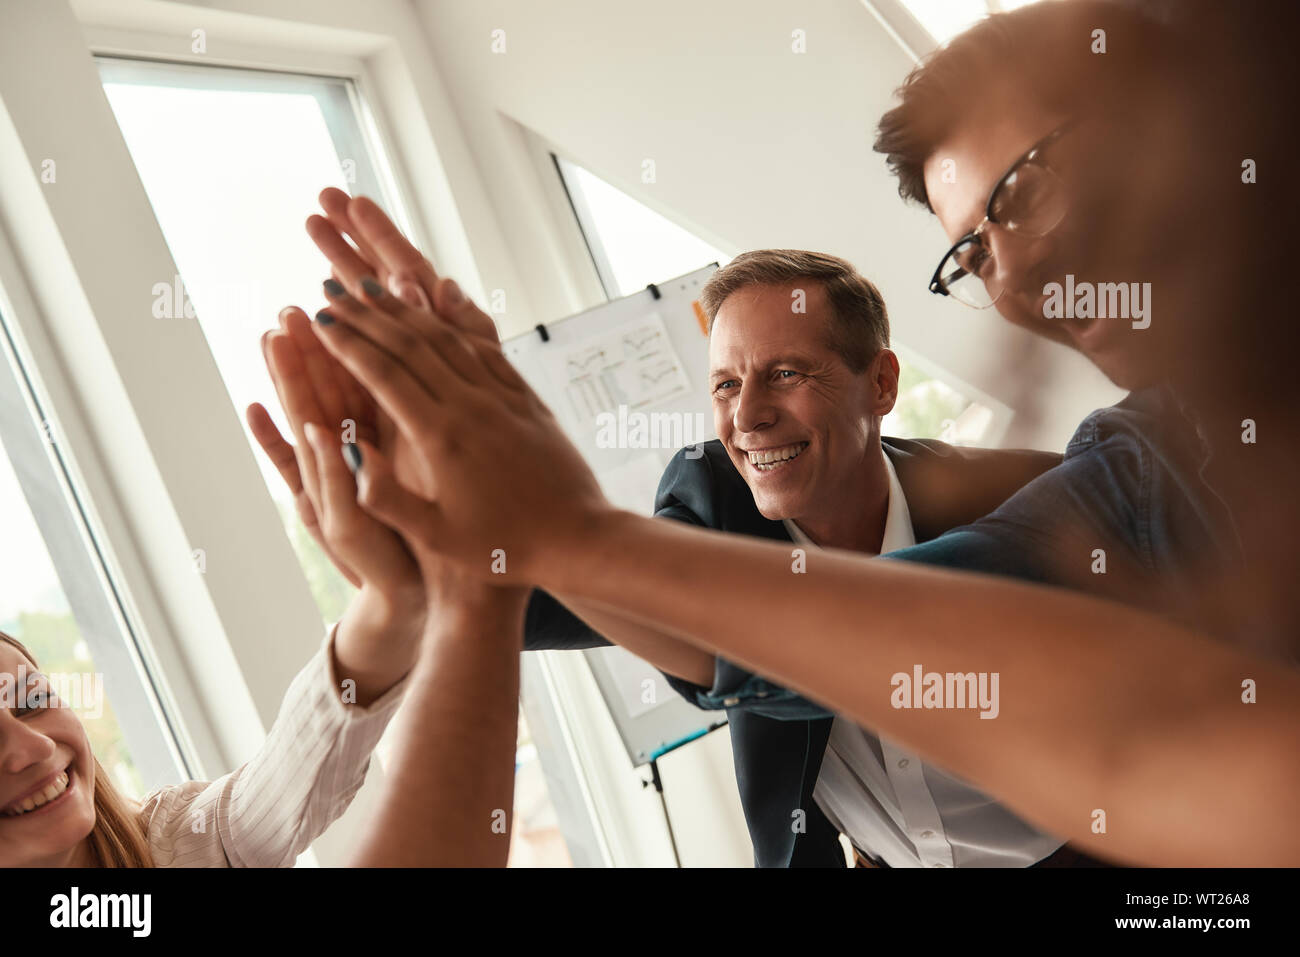 We are the best team Business people giving each other high-five and smiling while working together in the modern office. Teamwork. Success Stock Photo